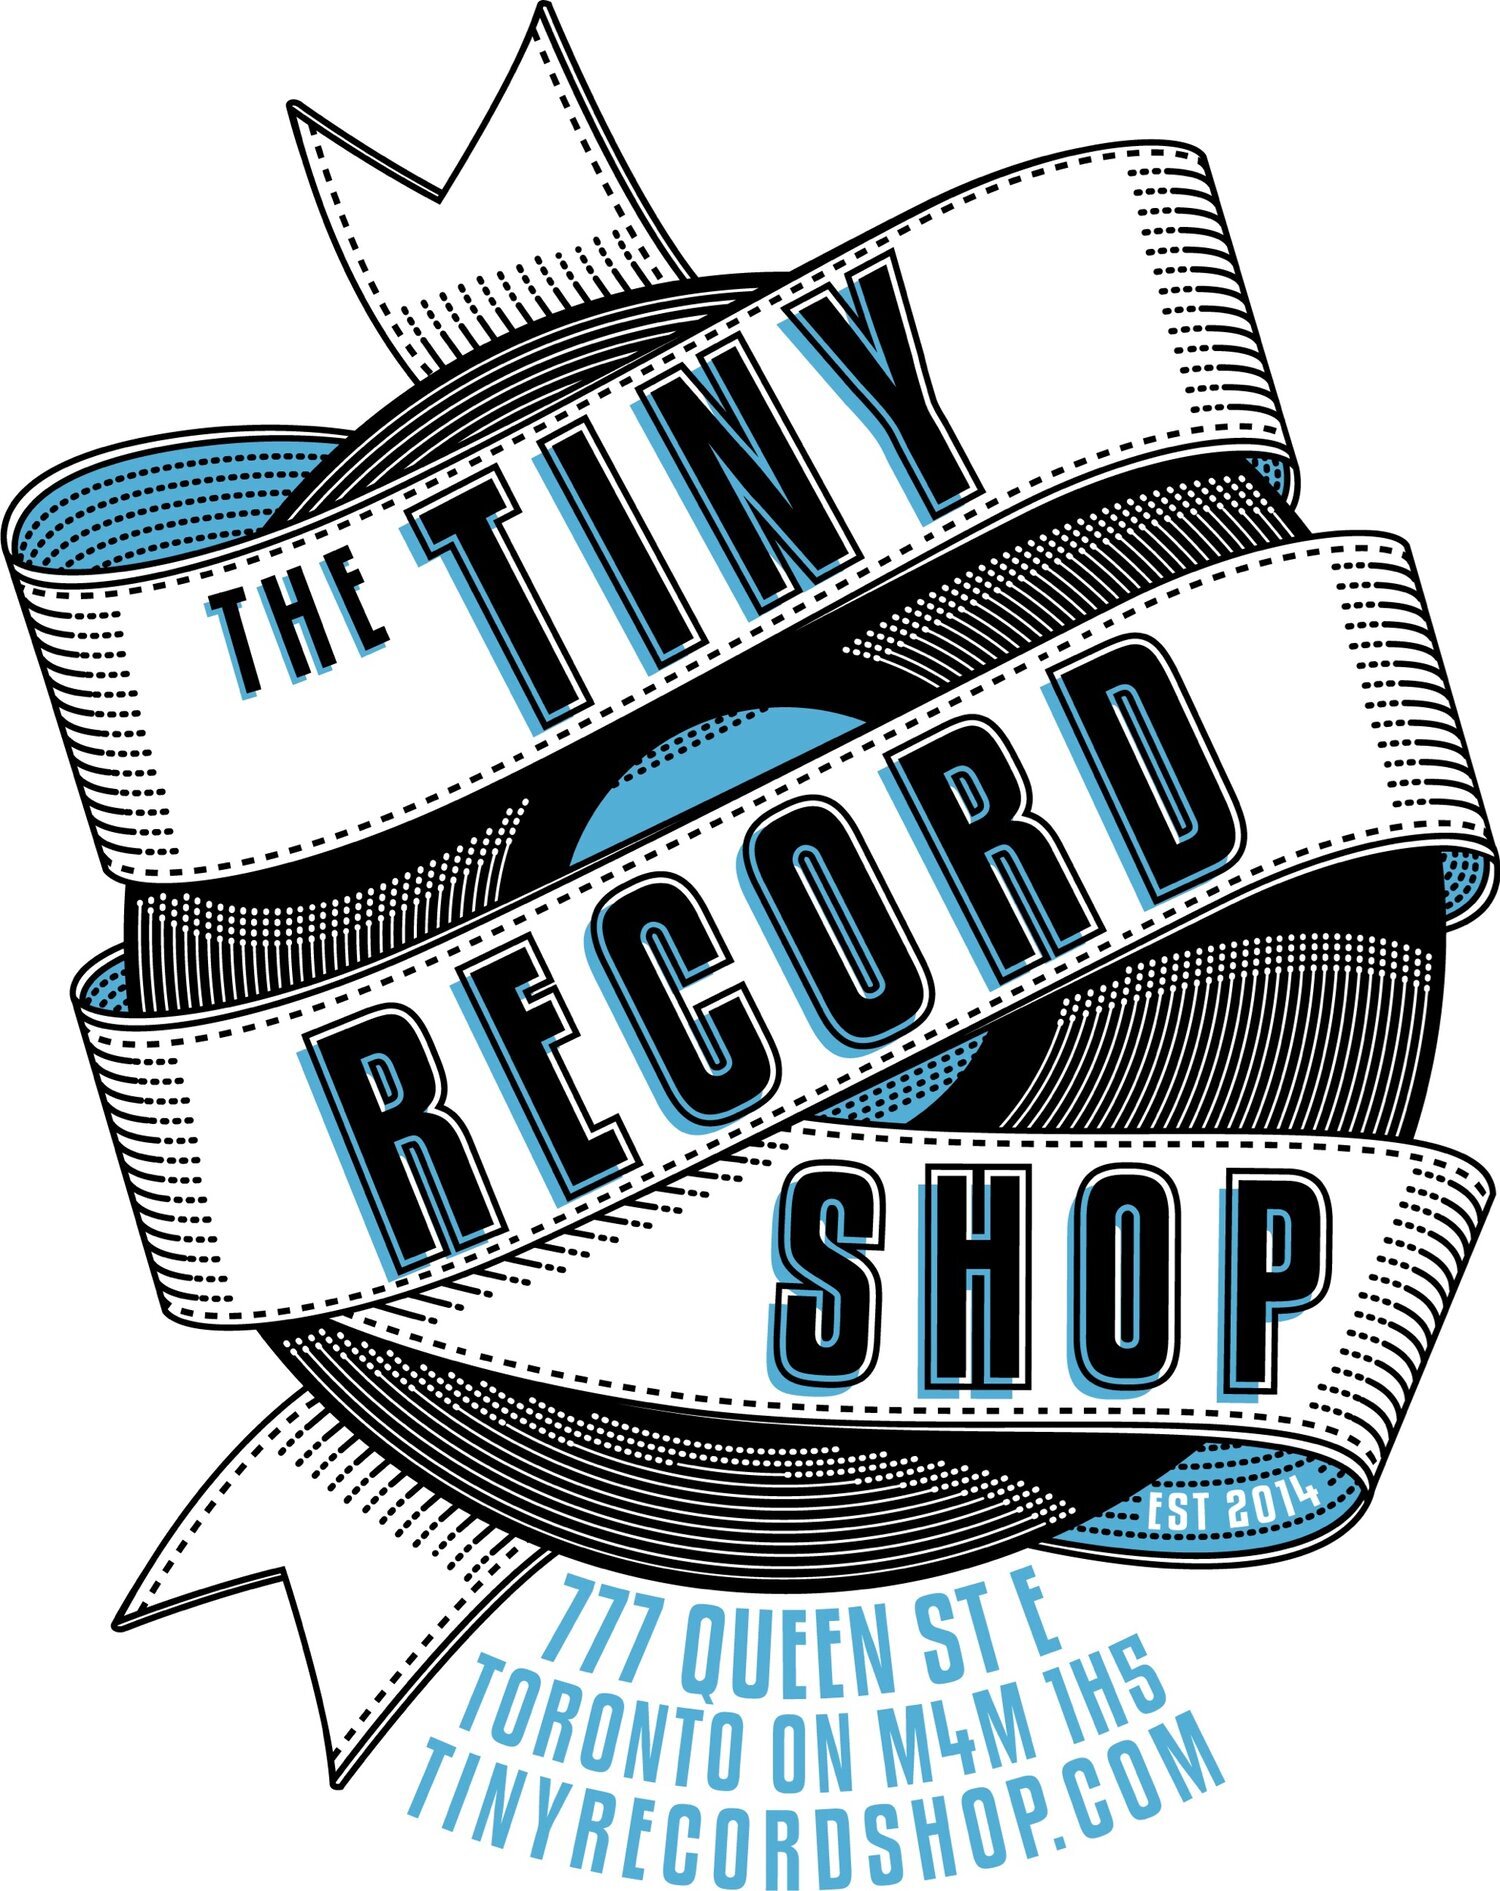 Tiny Record Shop | Not Your Average Record Shop